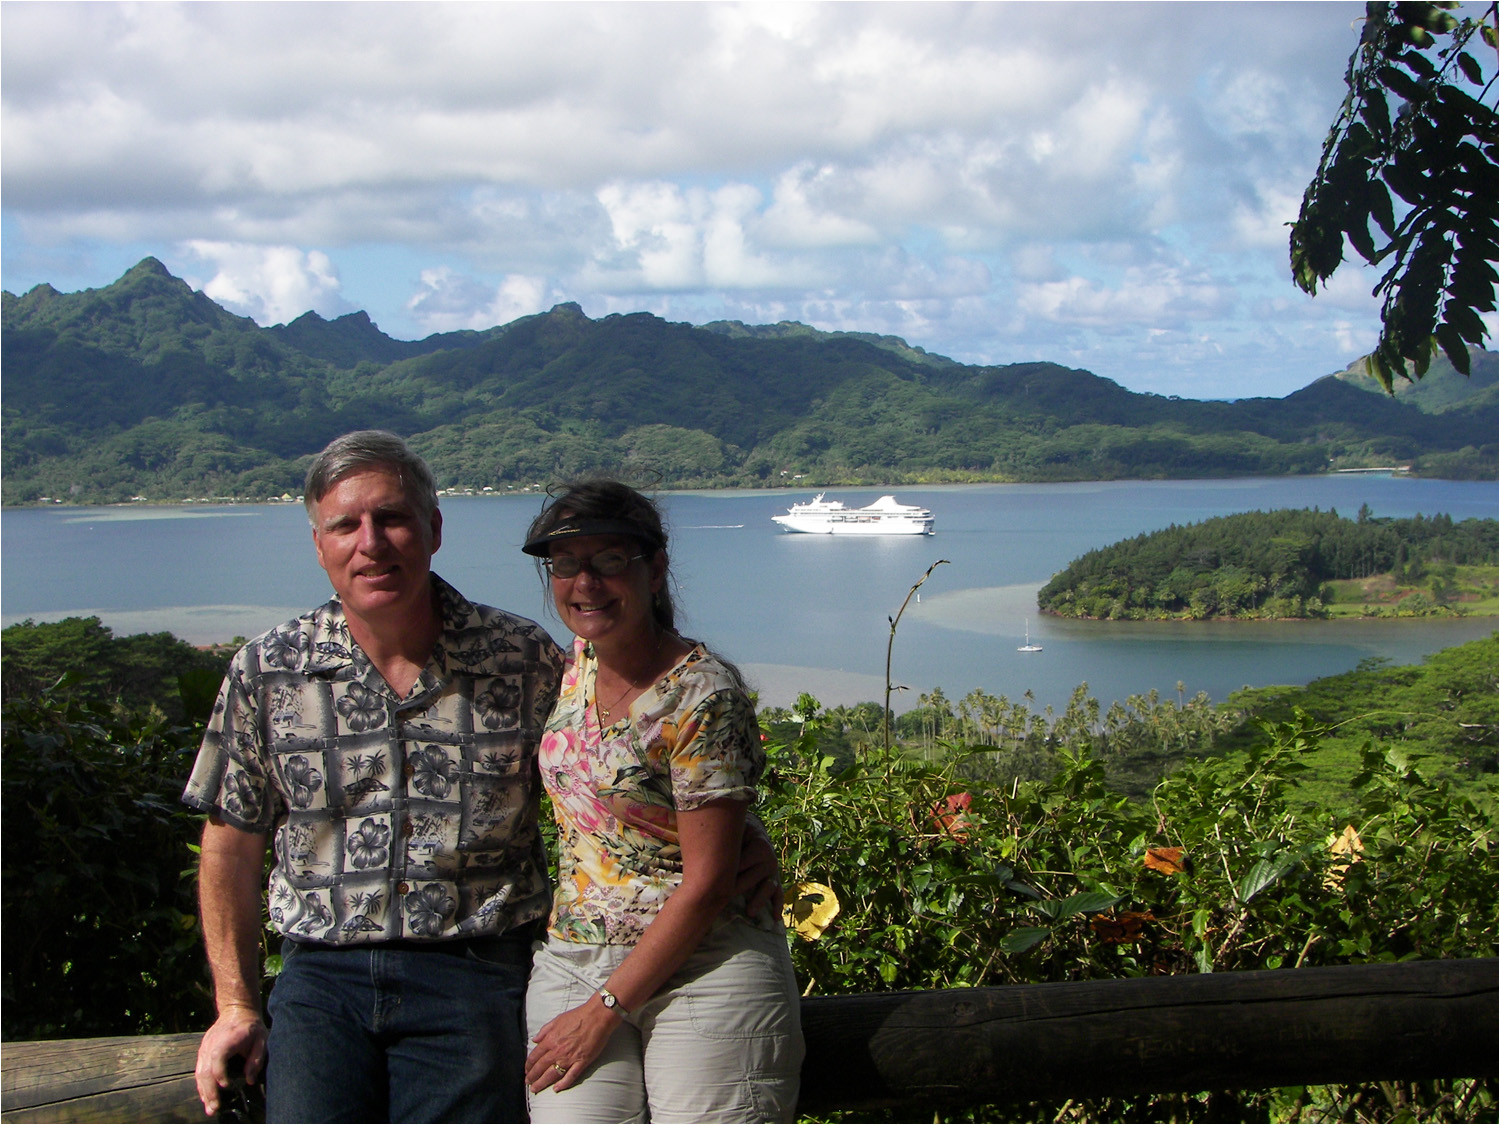 Scenic stop on our tour of Huahine with ship anchored in the lagoon.